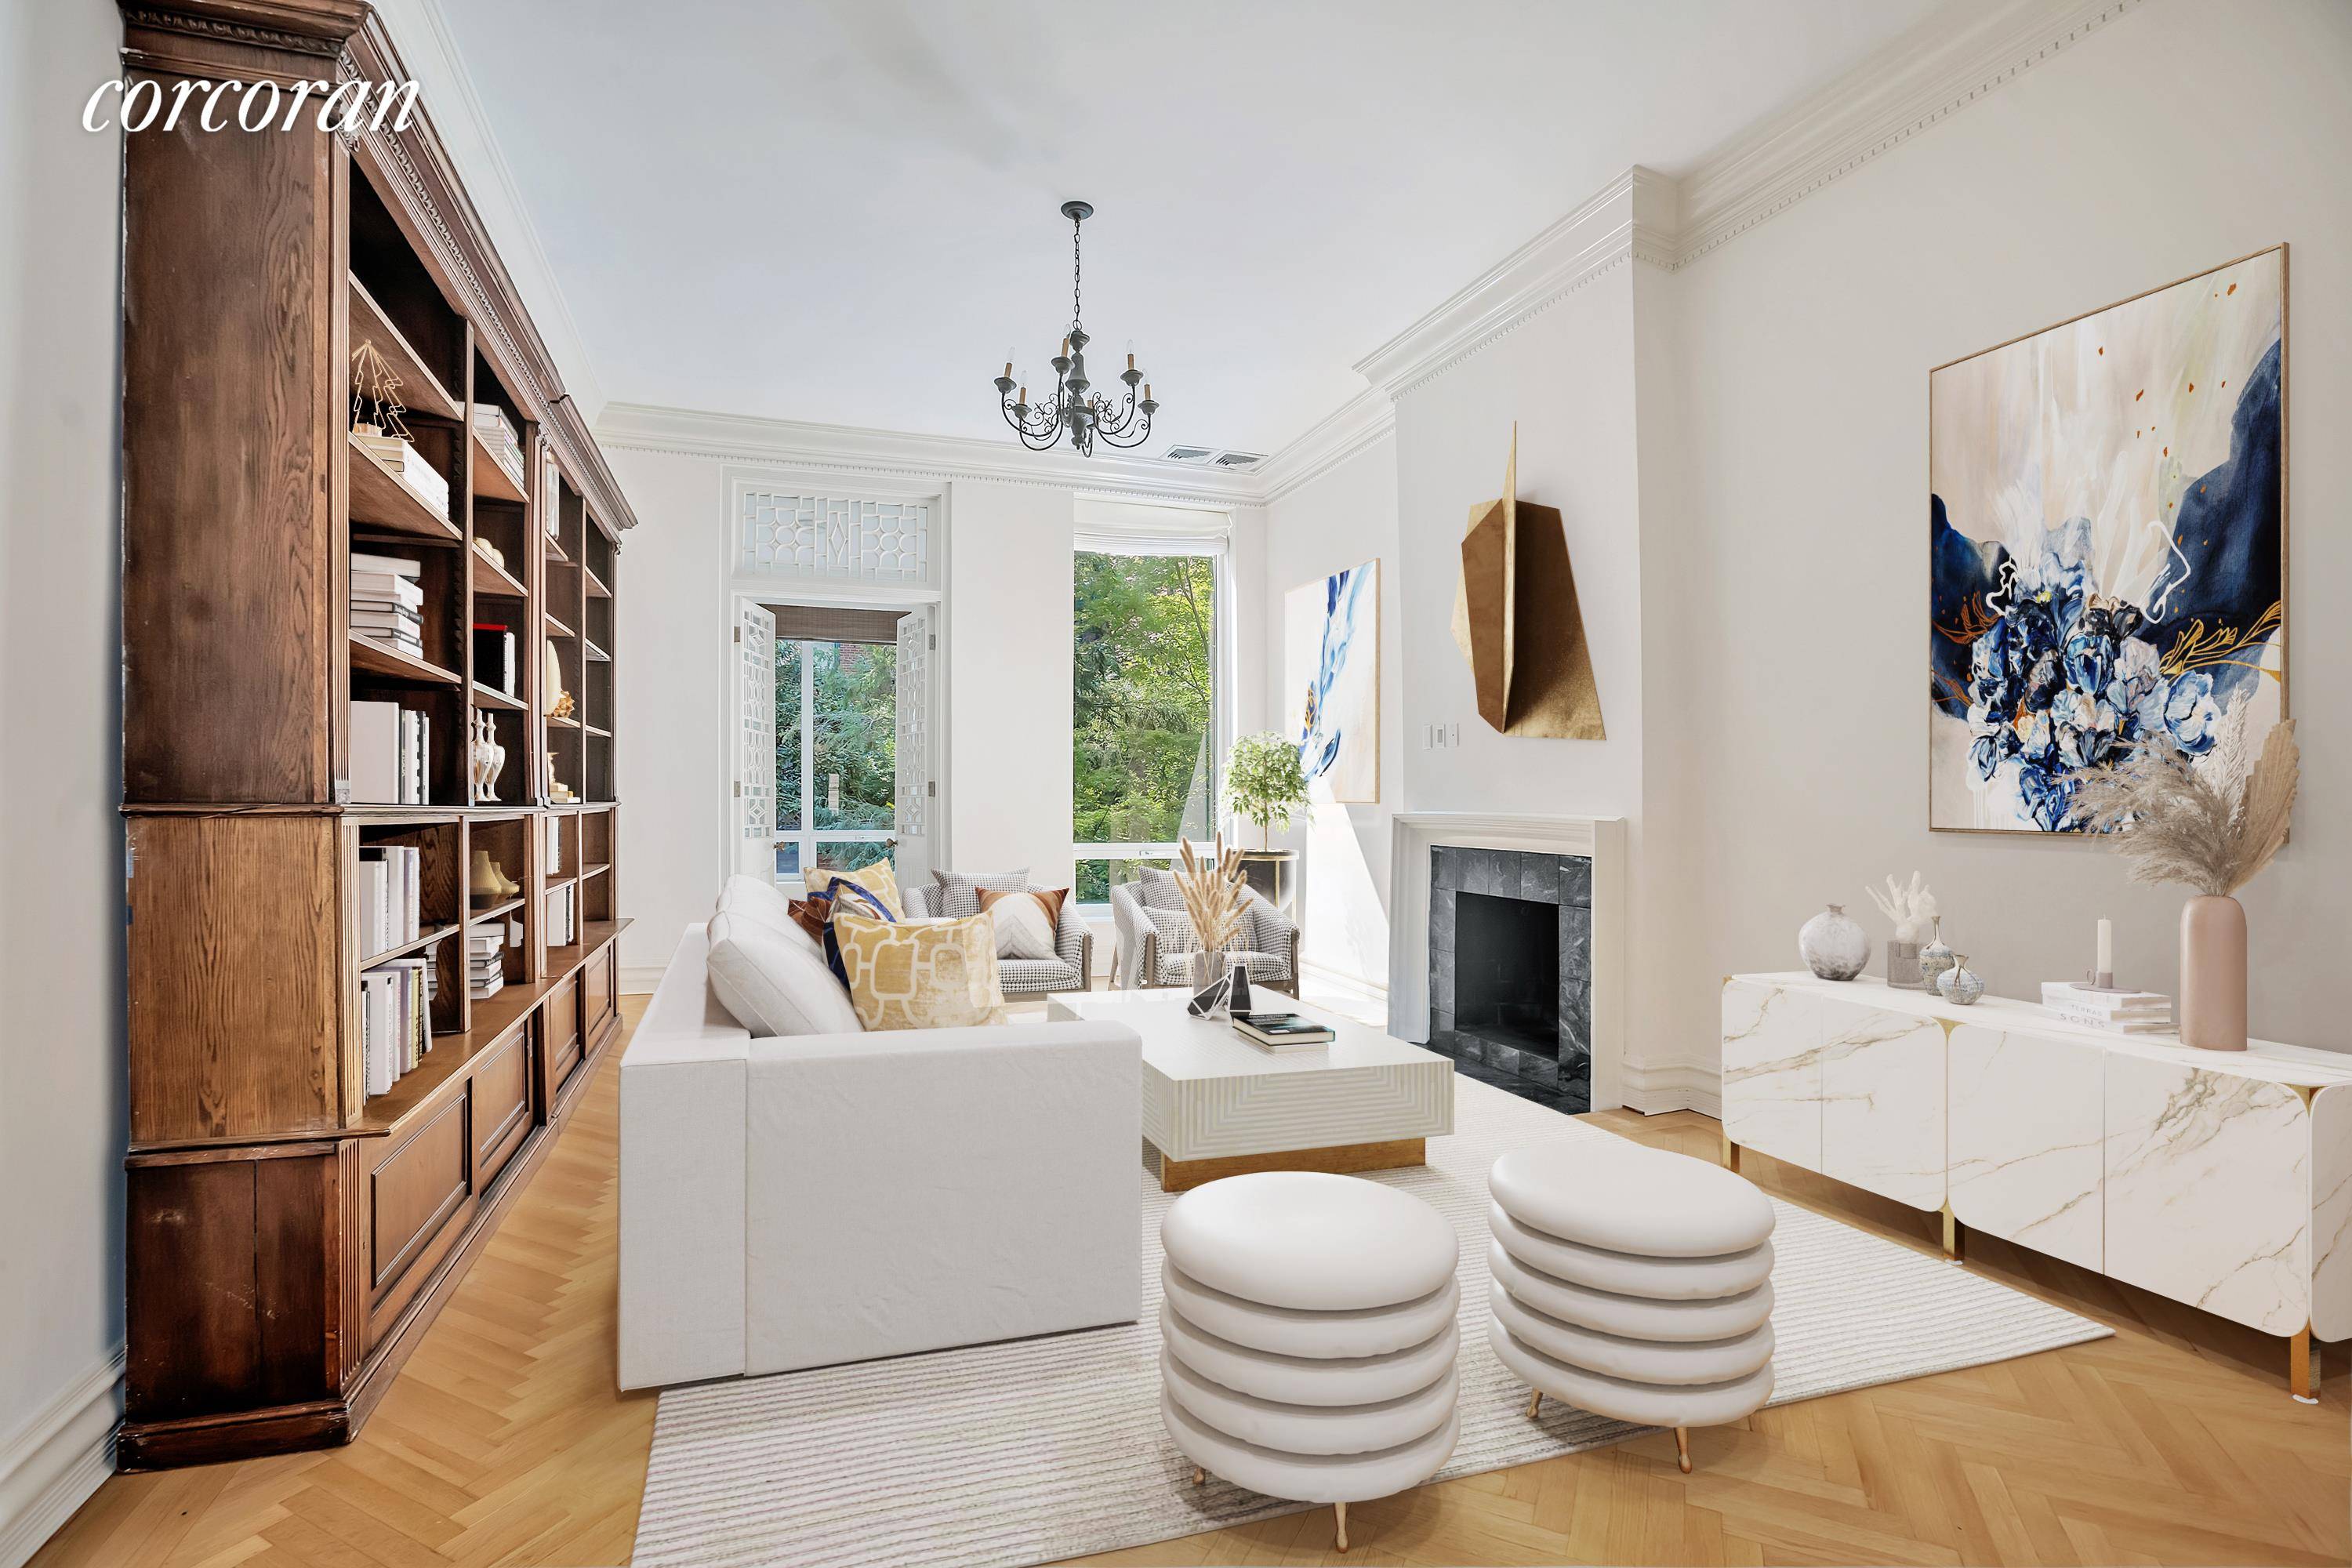 Perfectly situated on West 83rd Street, with Central Park as a backyard, this four story townhouse is grand, impressive, yet welcoming and warm.